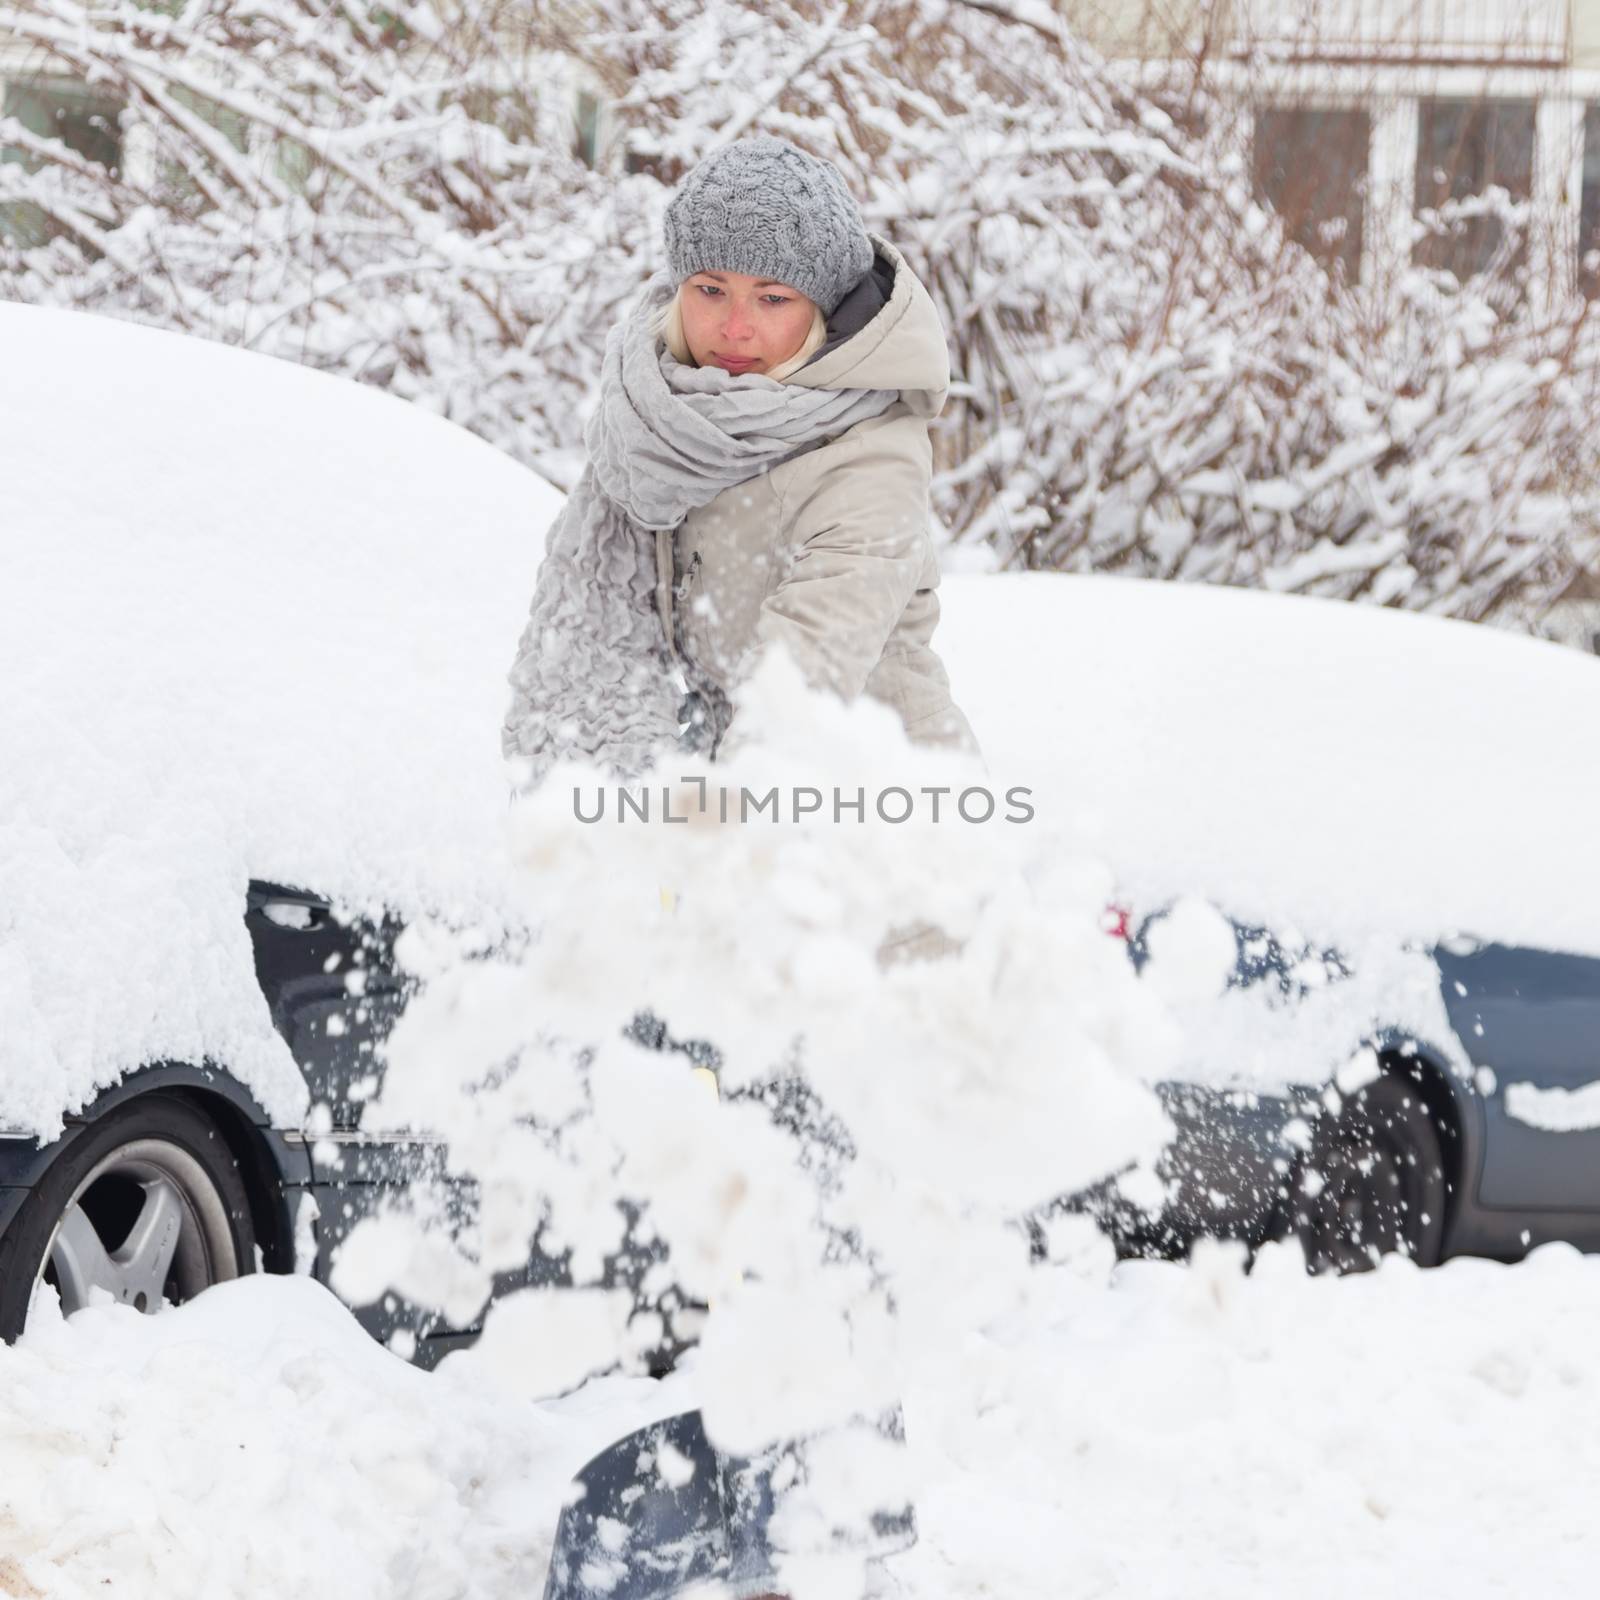 Independent woman shoveling snow in winter. by kasto